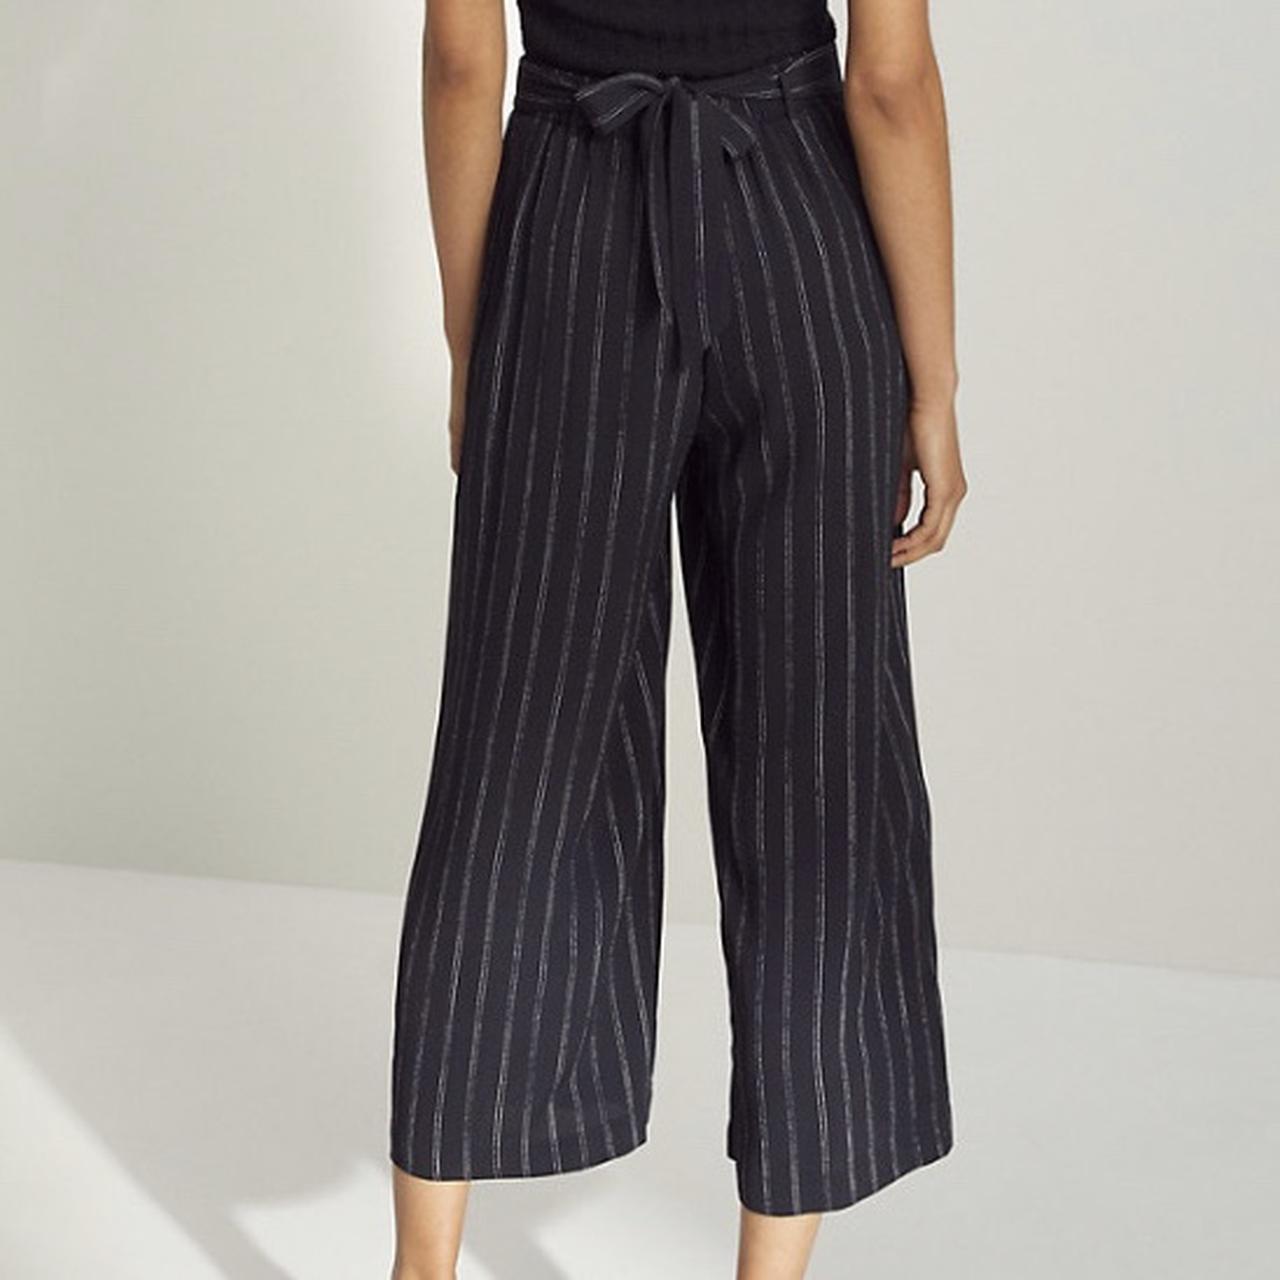 Wilfred, Pants & Jumpsuits, Aritzia Wilfred Daria Pant Faux Suede